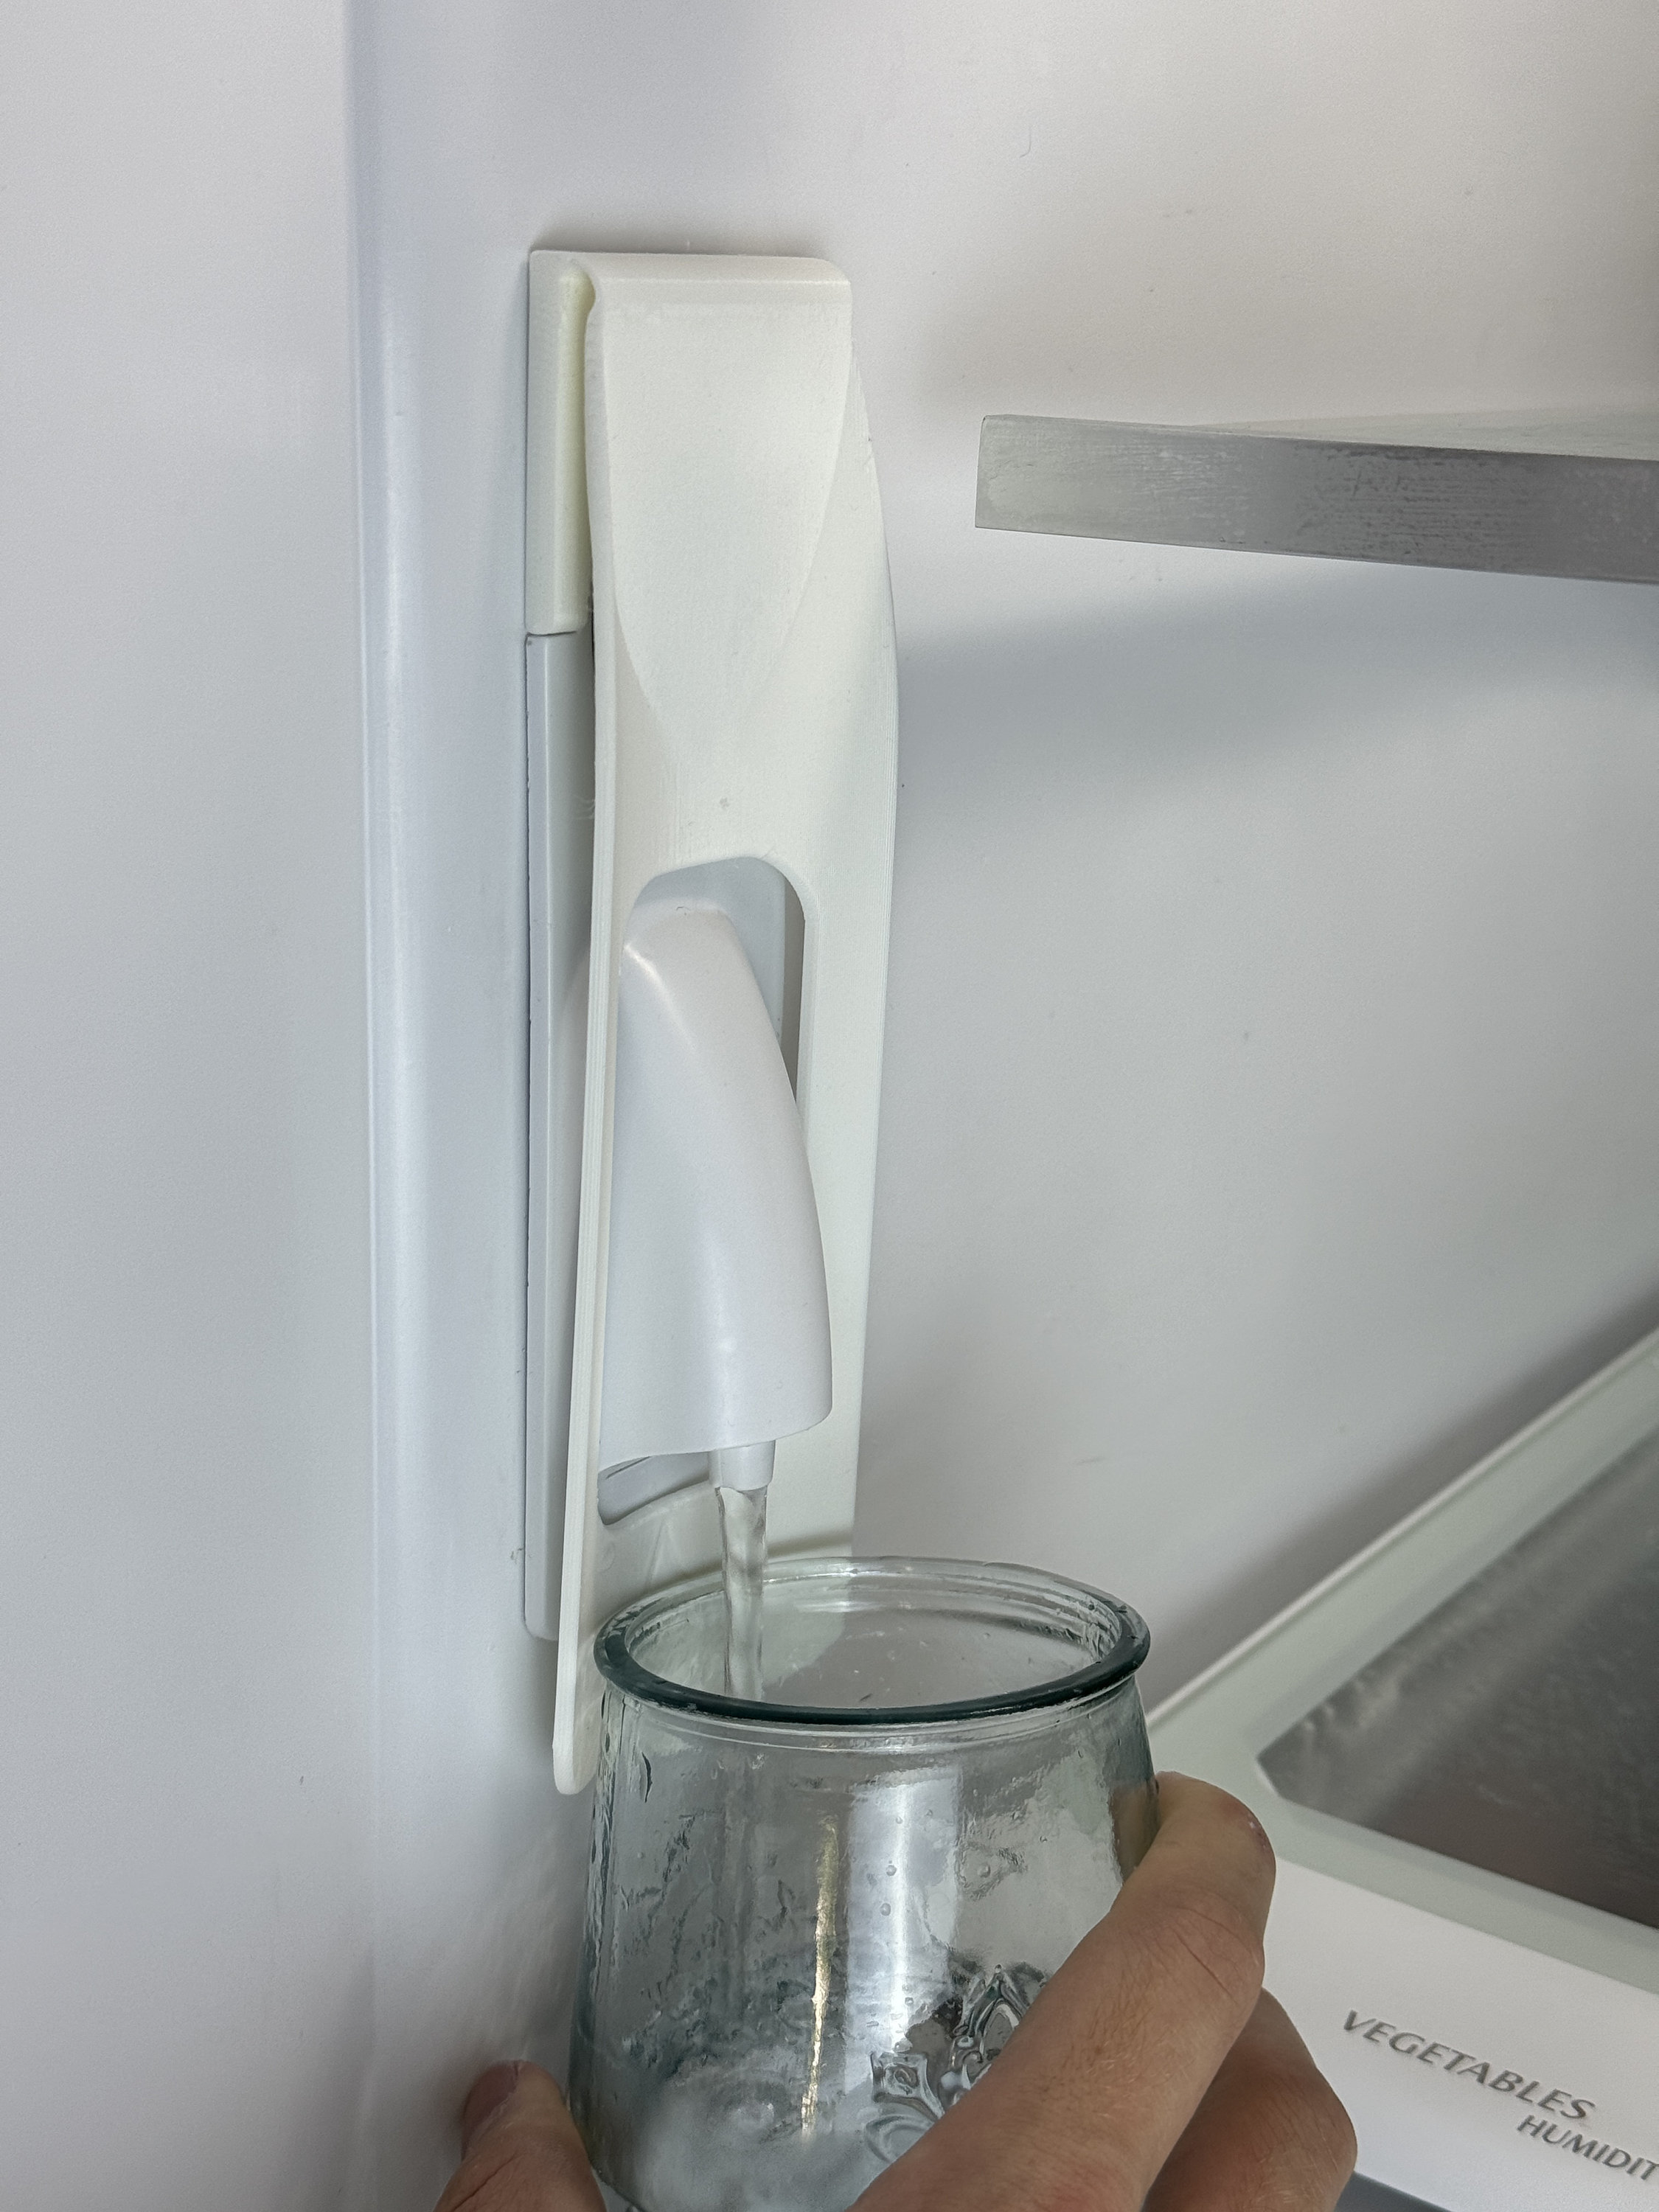 Water Dispenser Lever Compatible With Select Refrigerators Read